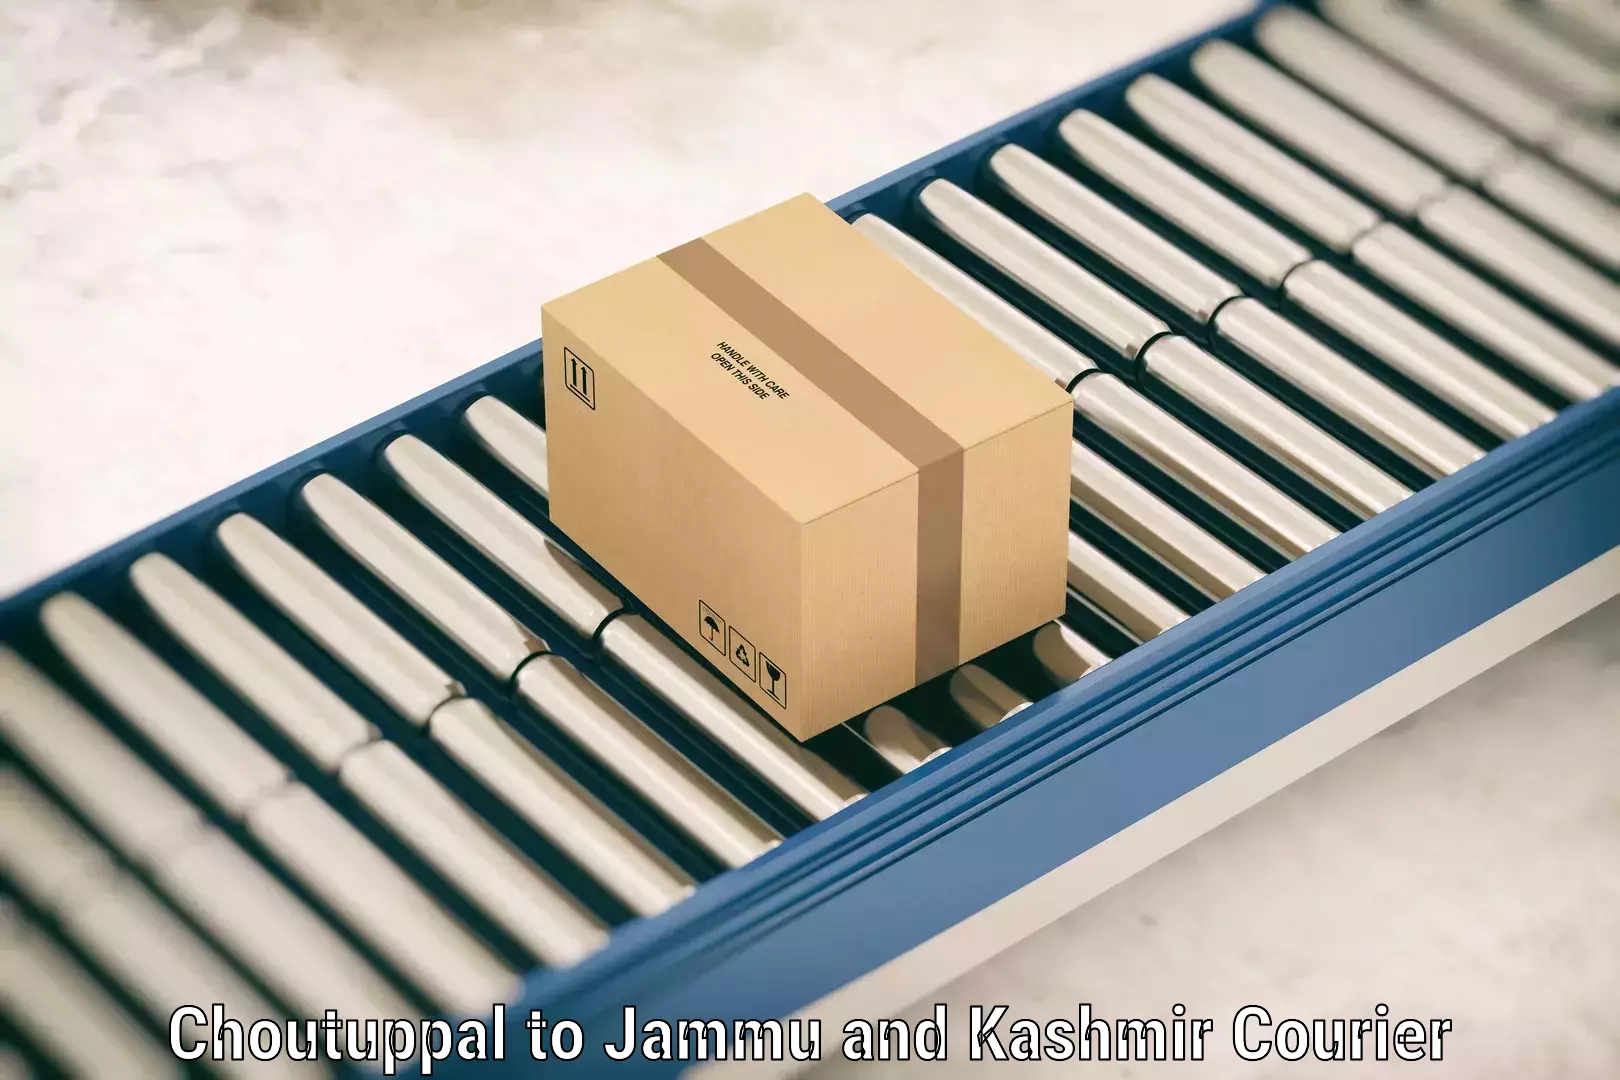 Luggage transport consultancy Choutuppal to Jammu and Kashmir